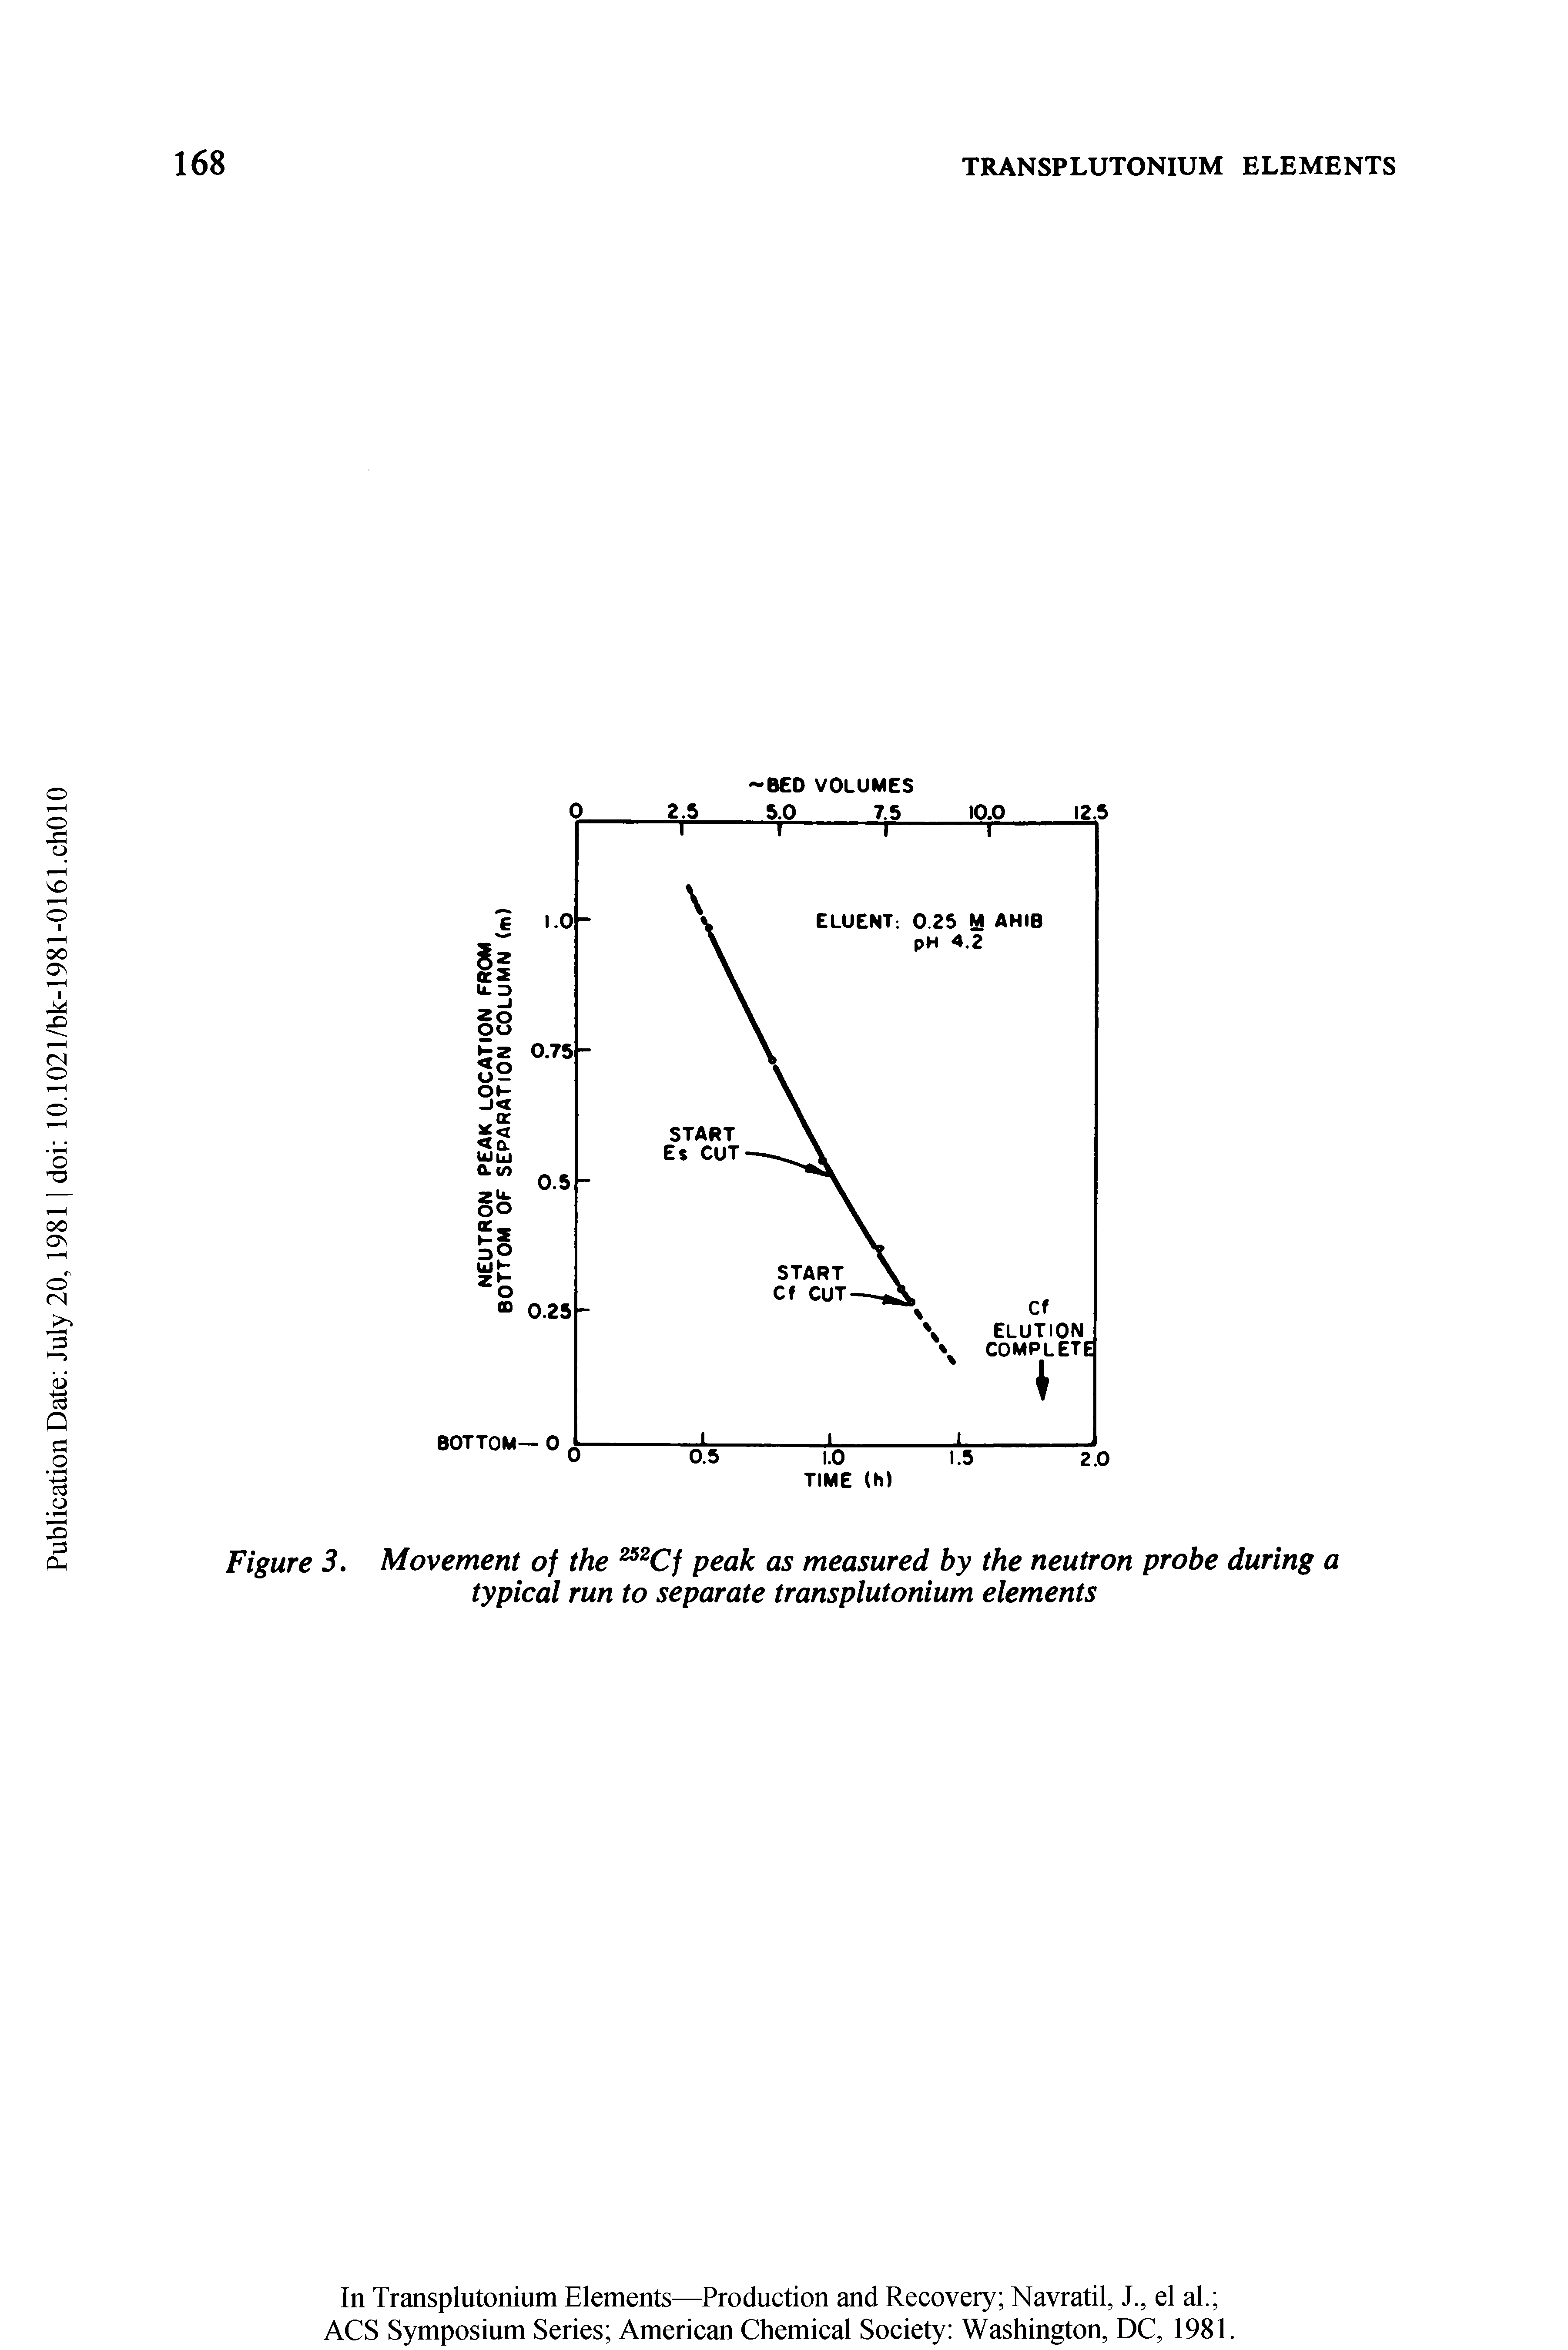 Figure 3. Movement of the 252Cf peak as measured by the neutron probe during a typical run to separate transplutonium elements...